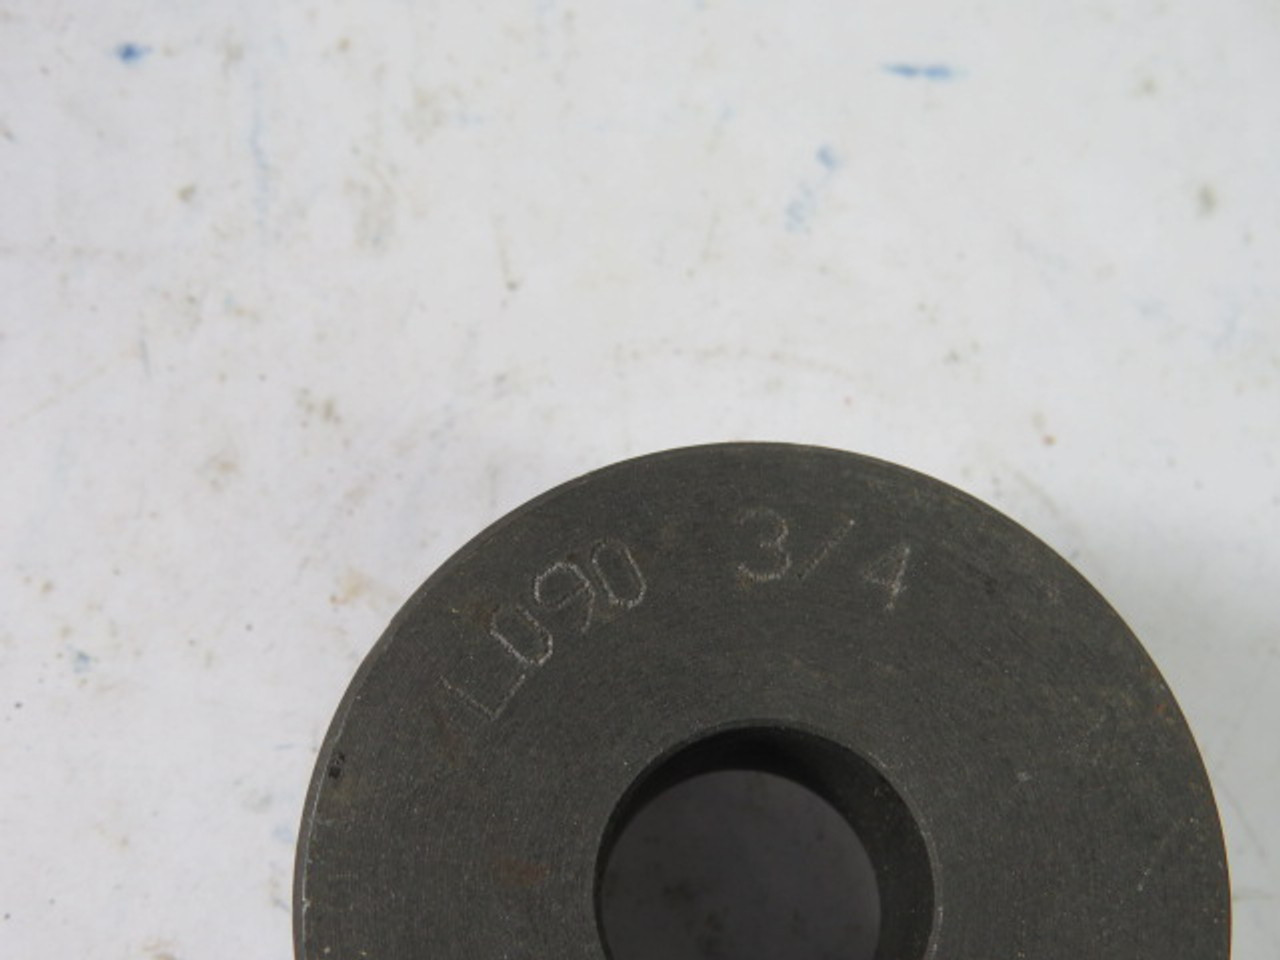 Masterdrive L090-3/4 Jaw Coupling 3/4� Bore USED